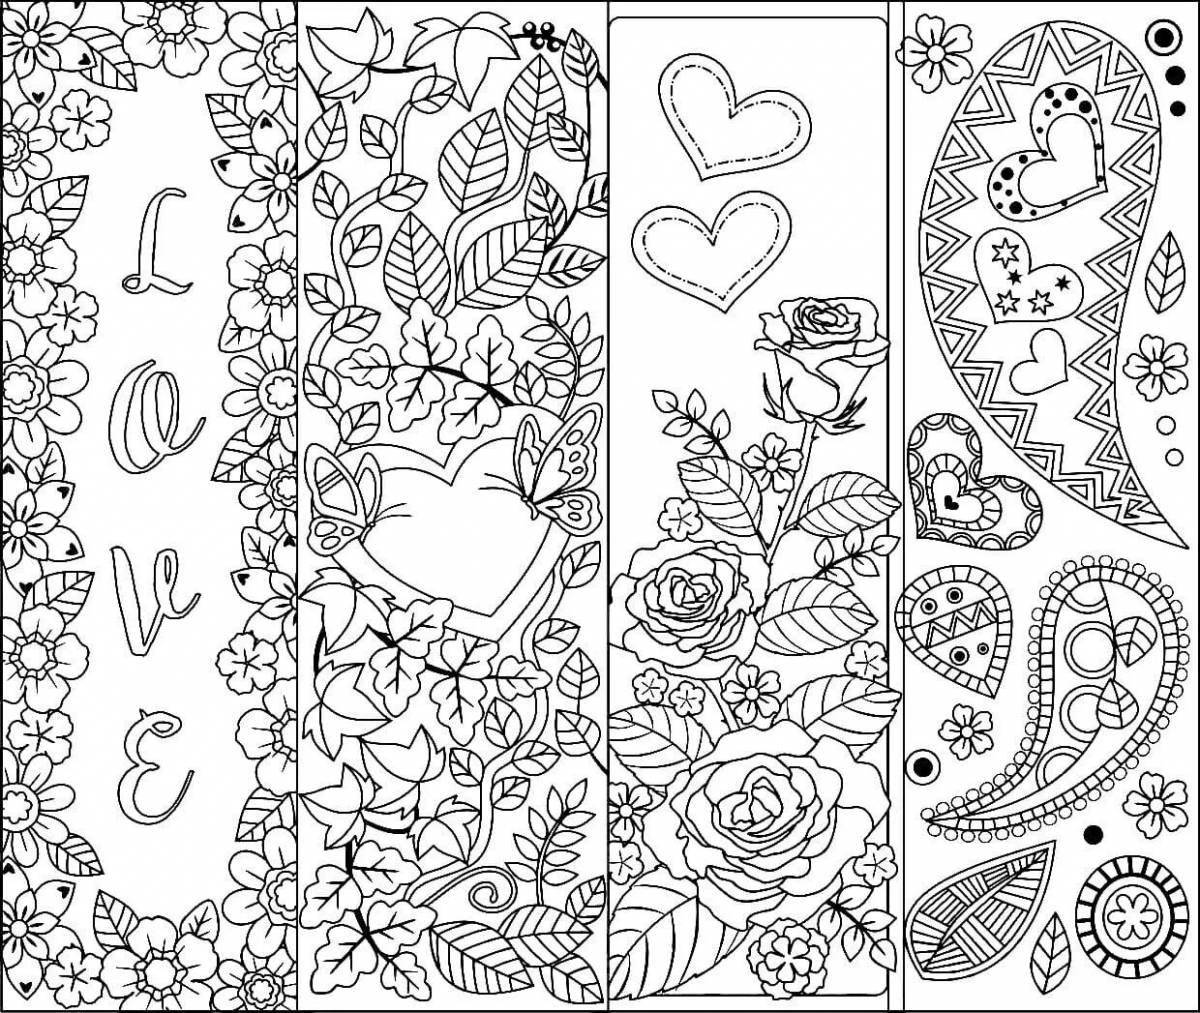 Colour explosion coloring book for 10 year old girls